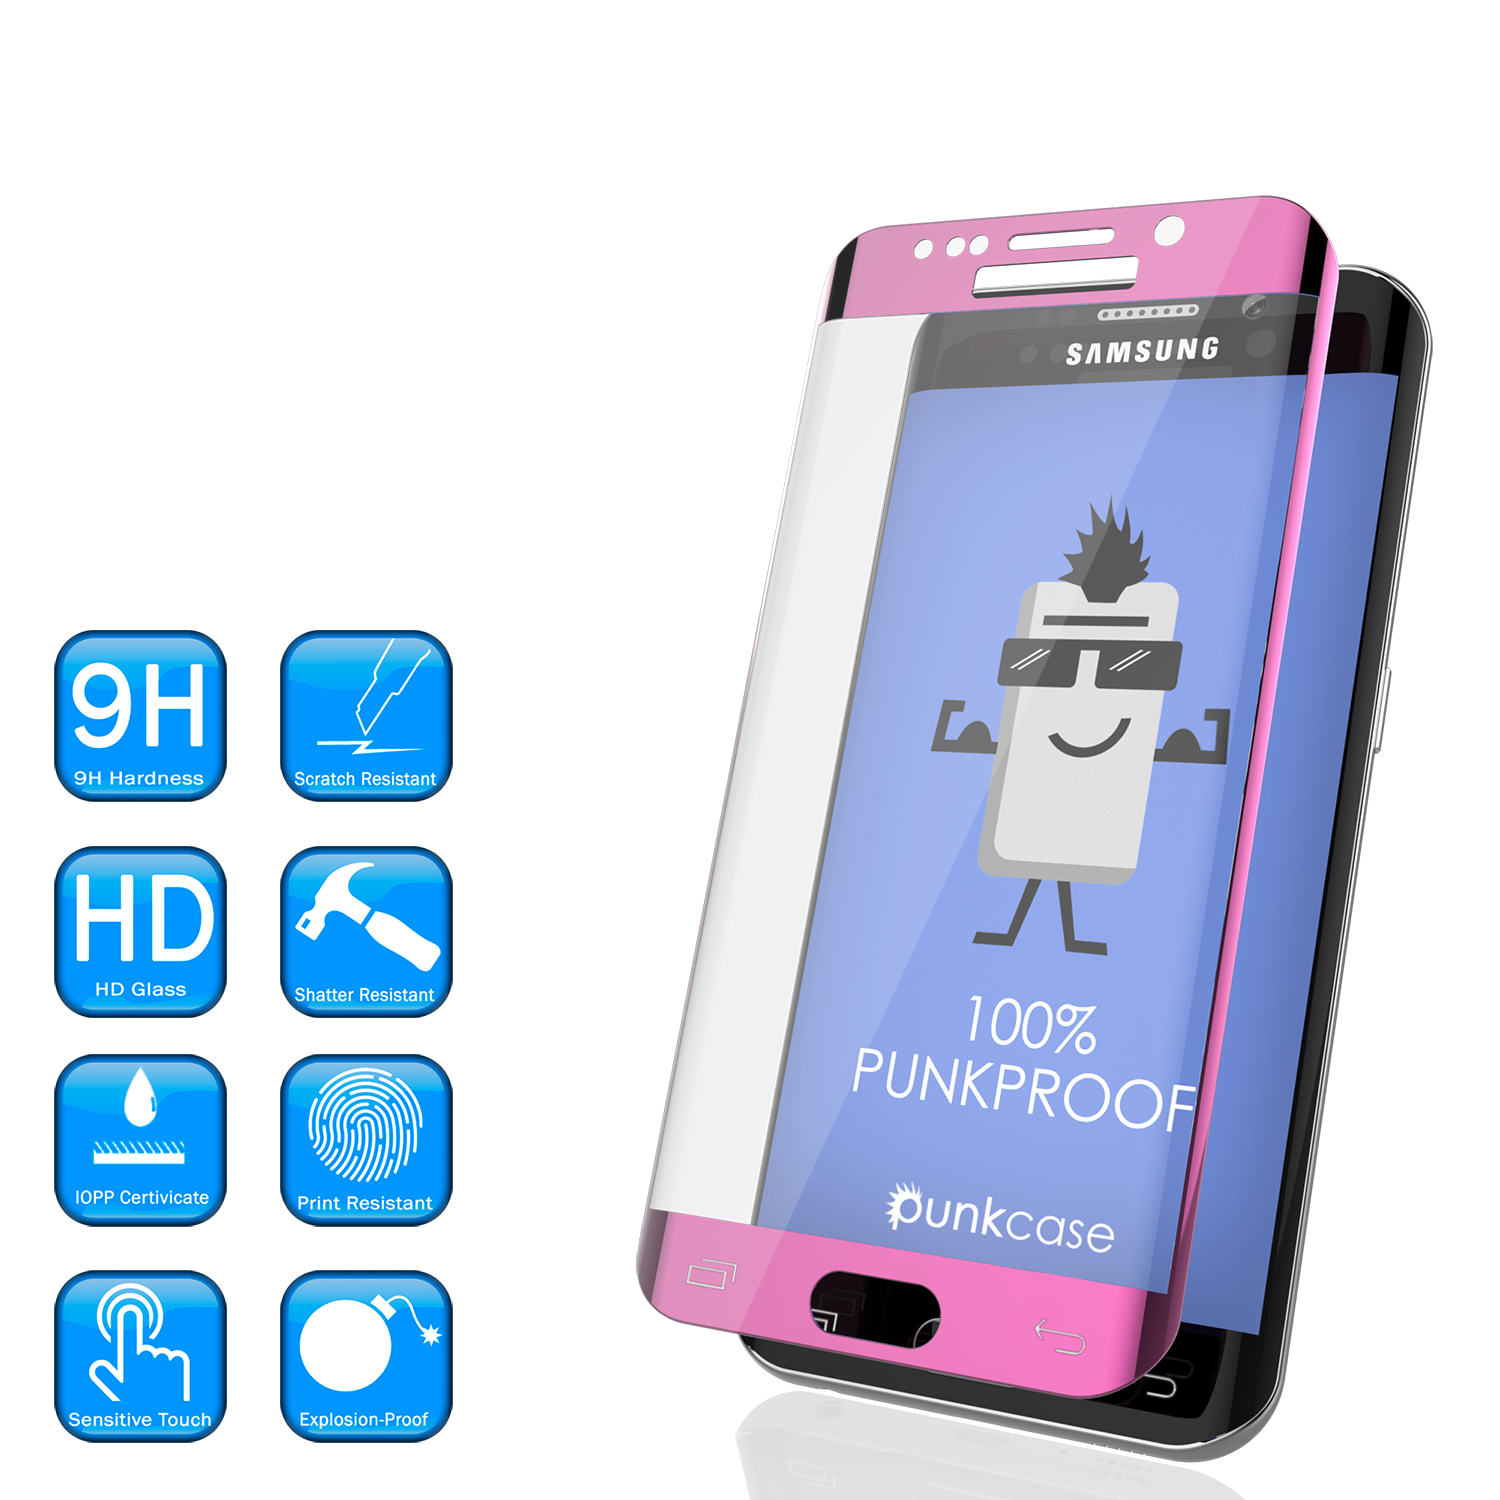 Galaxy S6 Edge Pink Tempered Glass Screen Protector, PUNKSHIELD \0.33mm Thick 9H Glass